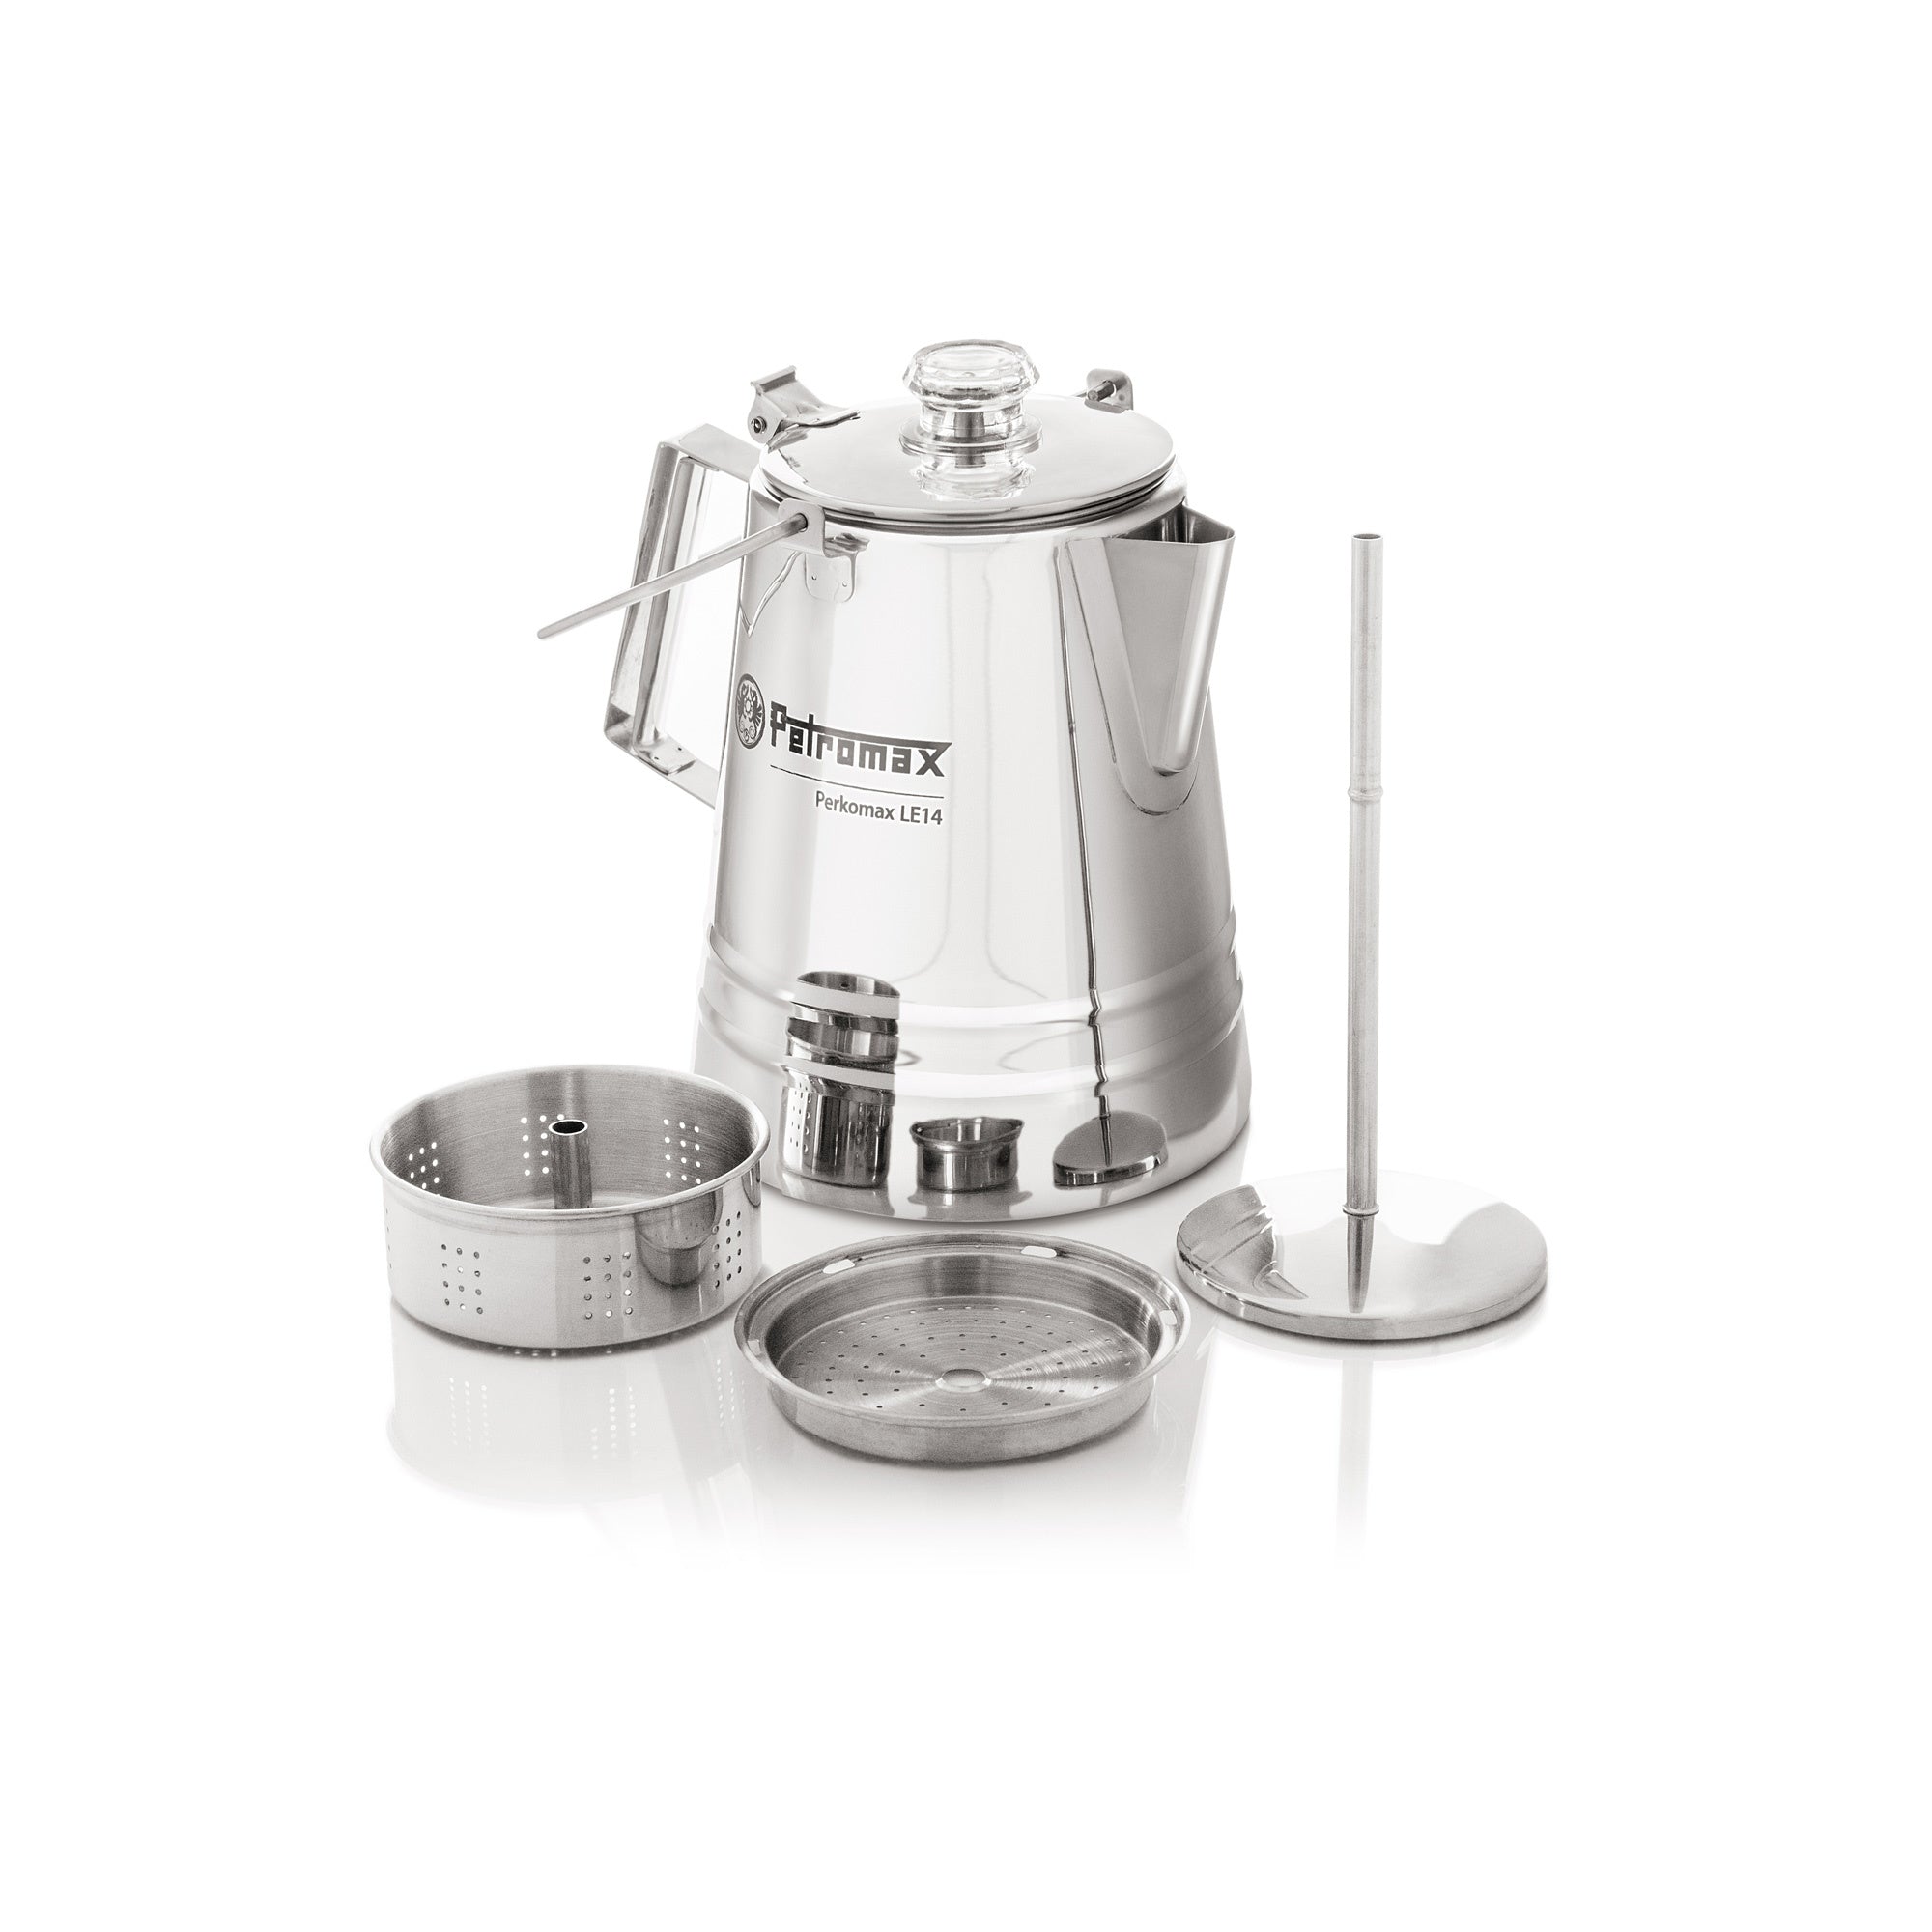 Percolator LE14 Stainless